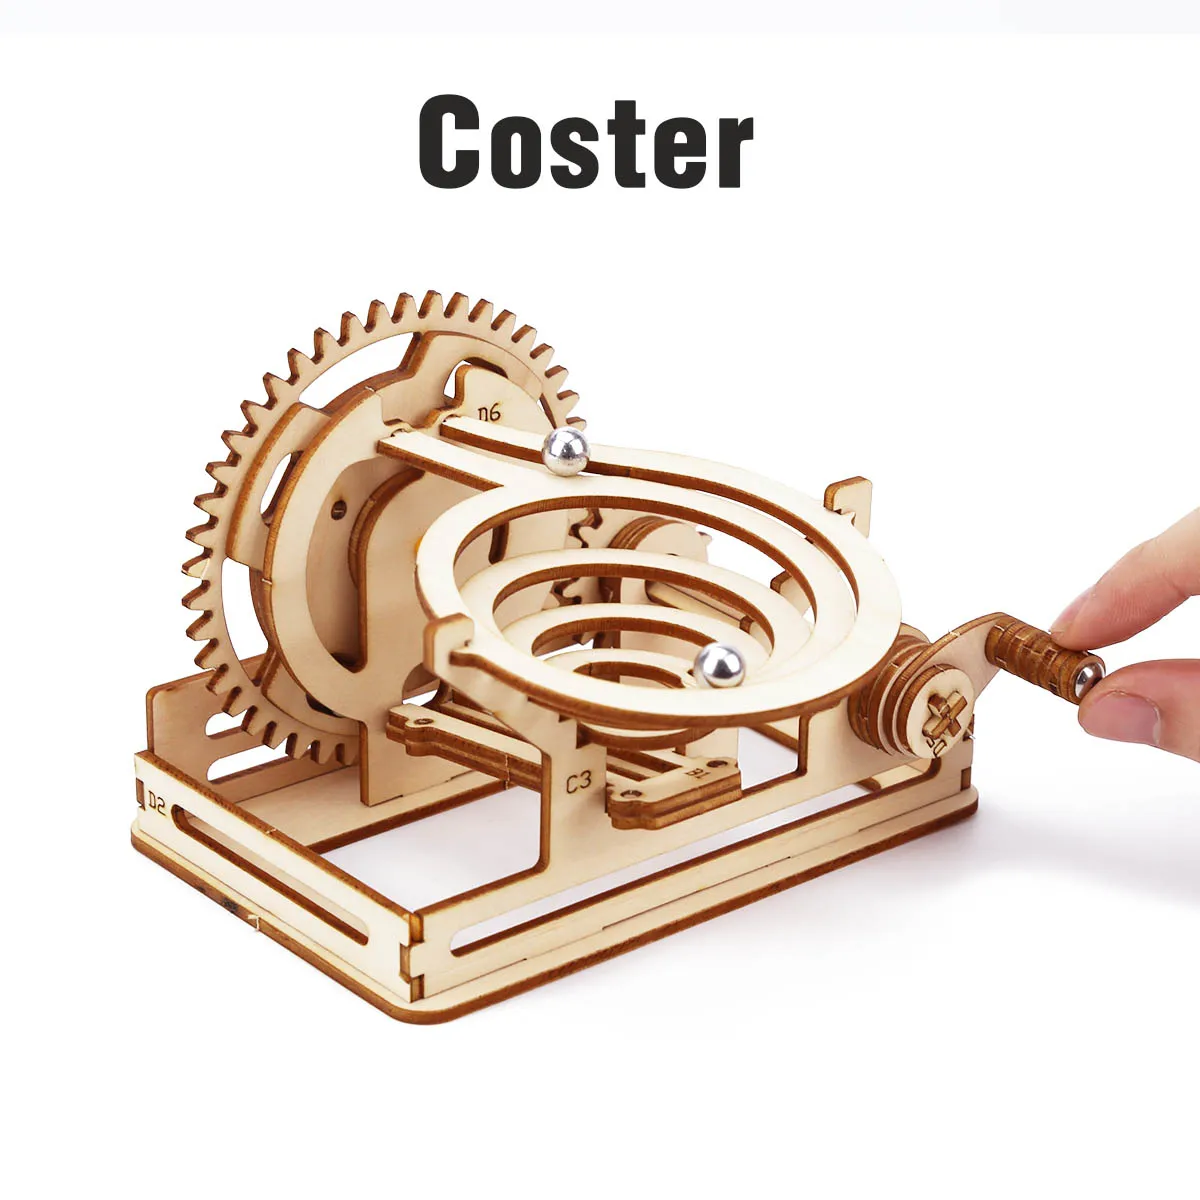 

4 Kinds Marble Race Run 3D Wooden Puzzle Mechanical Kit Stem Science Physics Toy Maze Ball Assembly Model Building For Kids